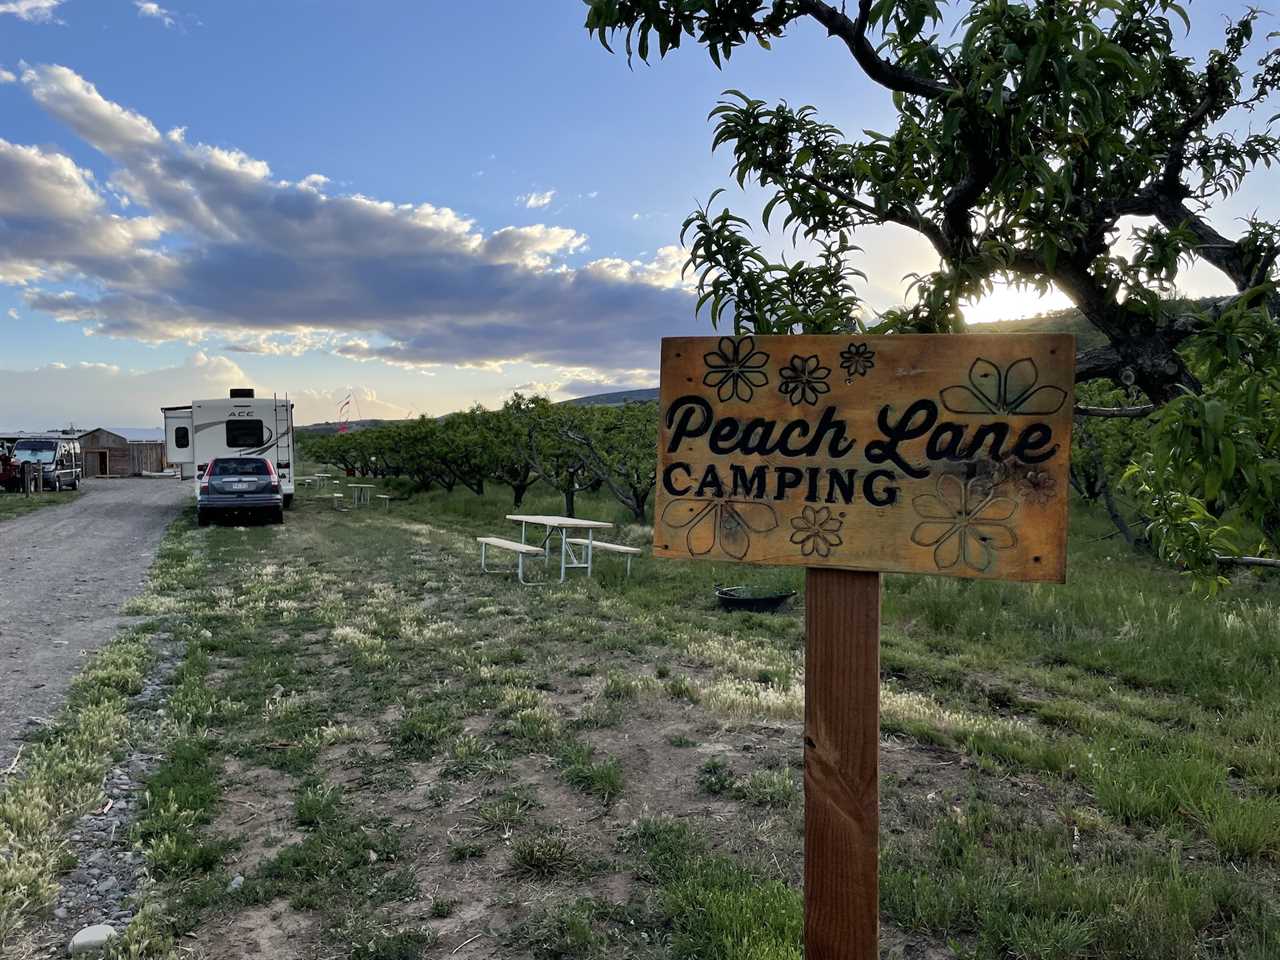 Paonia Colorado Orchard Camping. Image by Follow Your Detour.